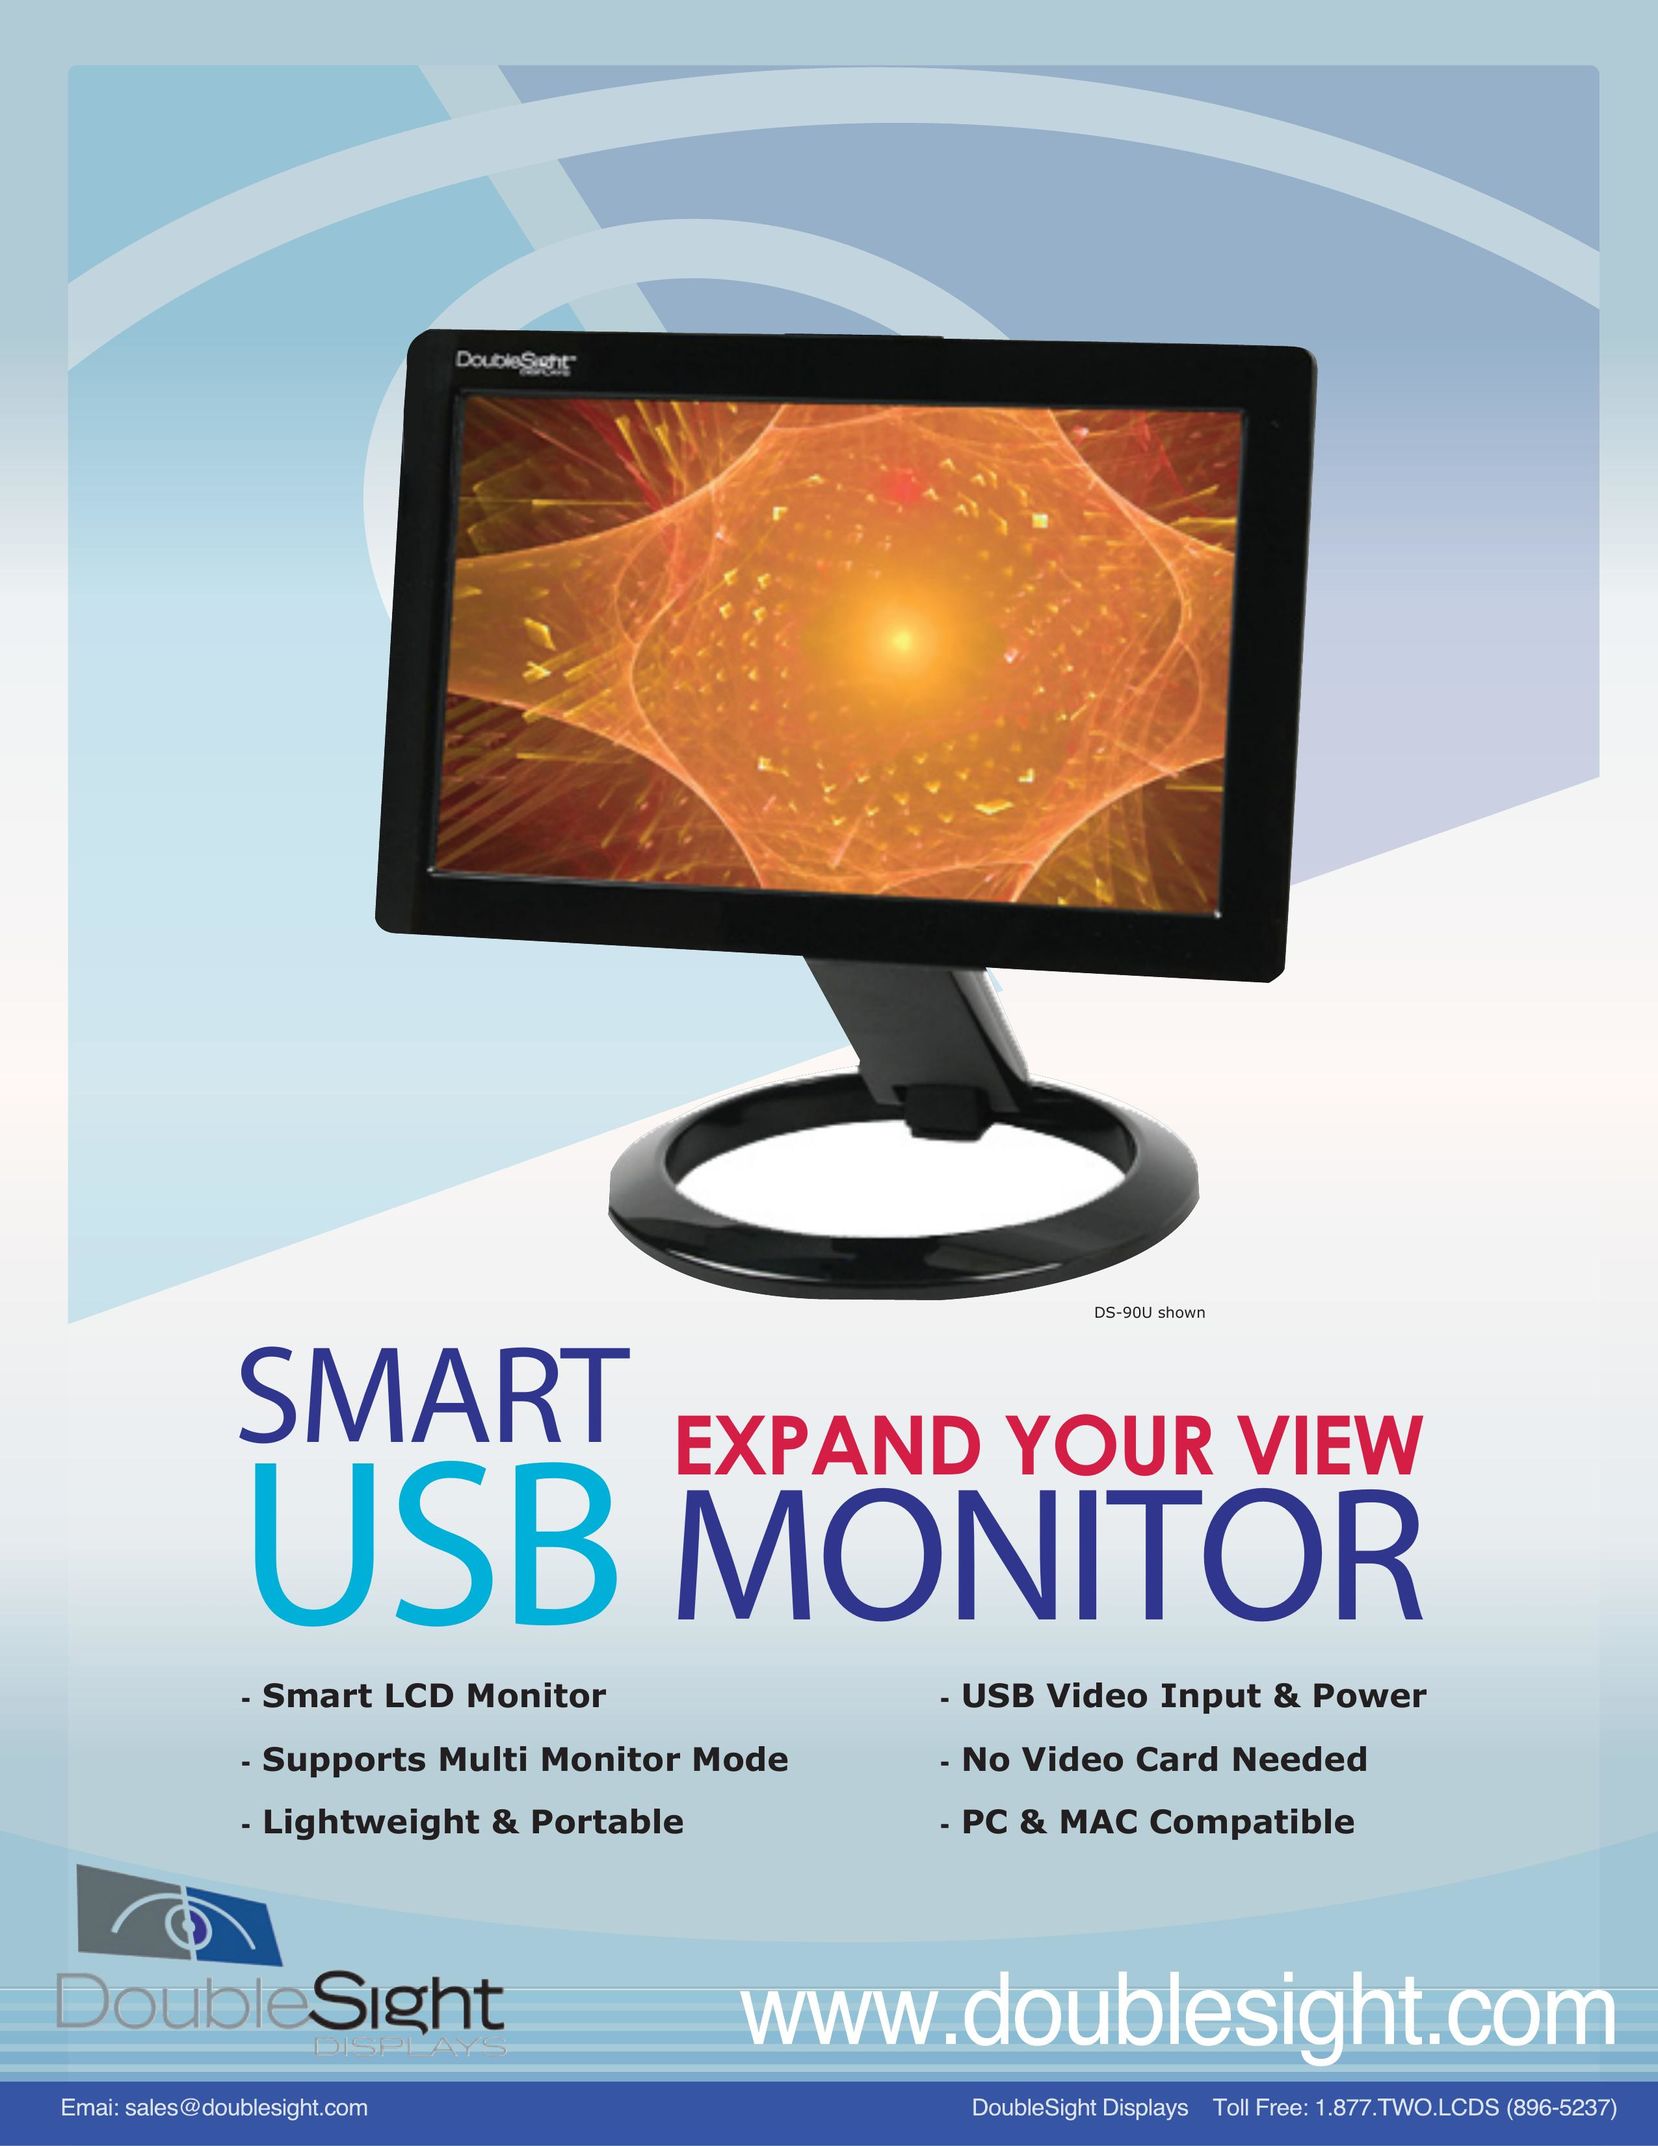 DoubleSight Displays Smart USB Expand Your View Monitor Computer Monitor User Manual